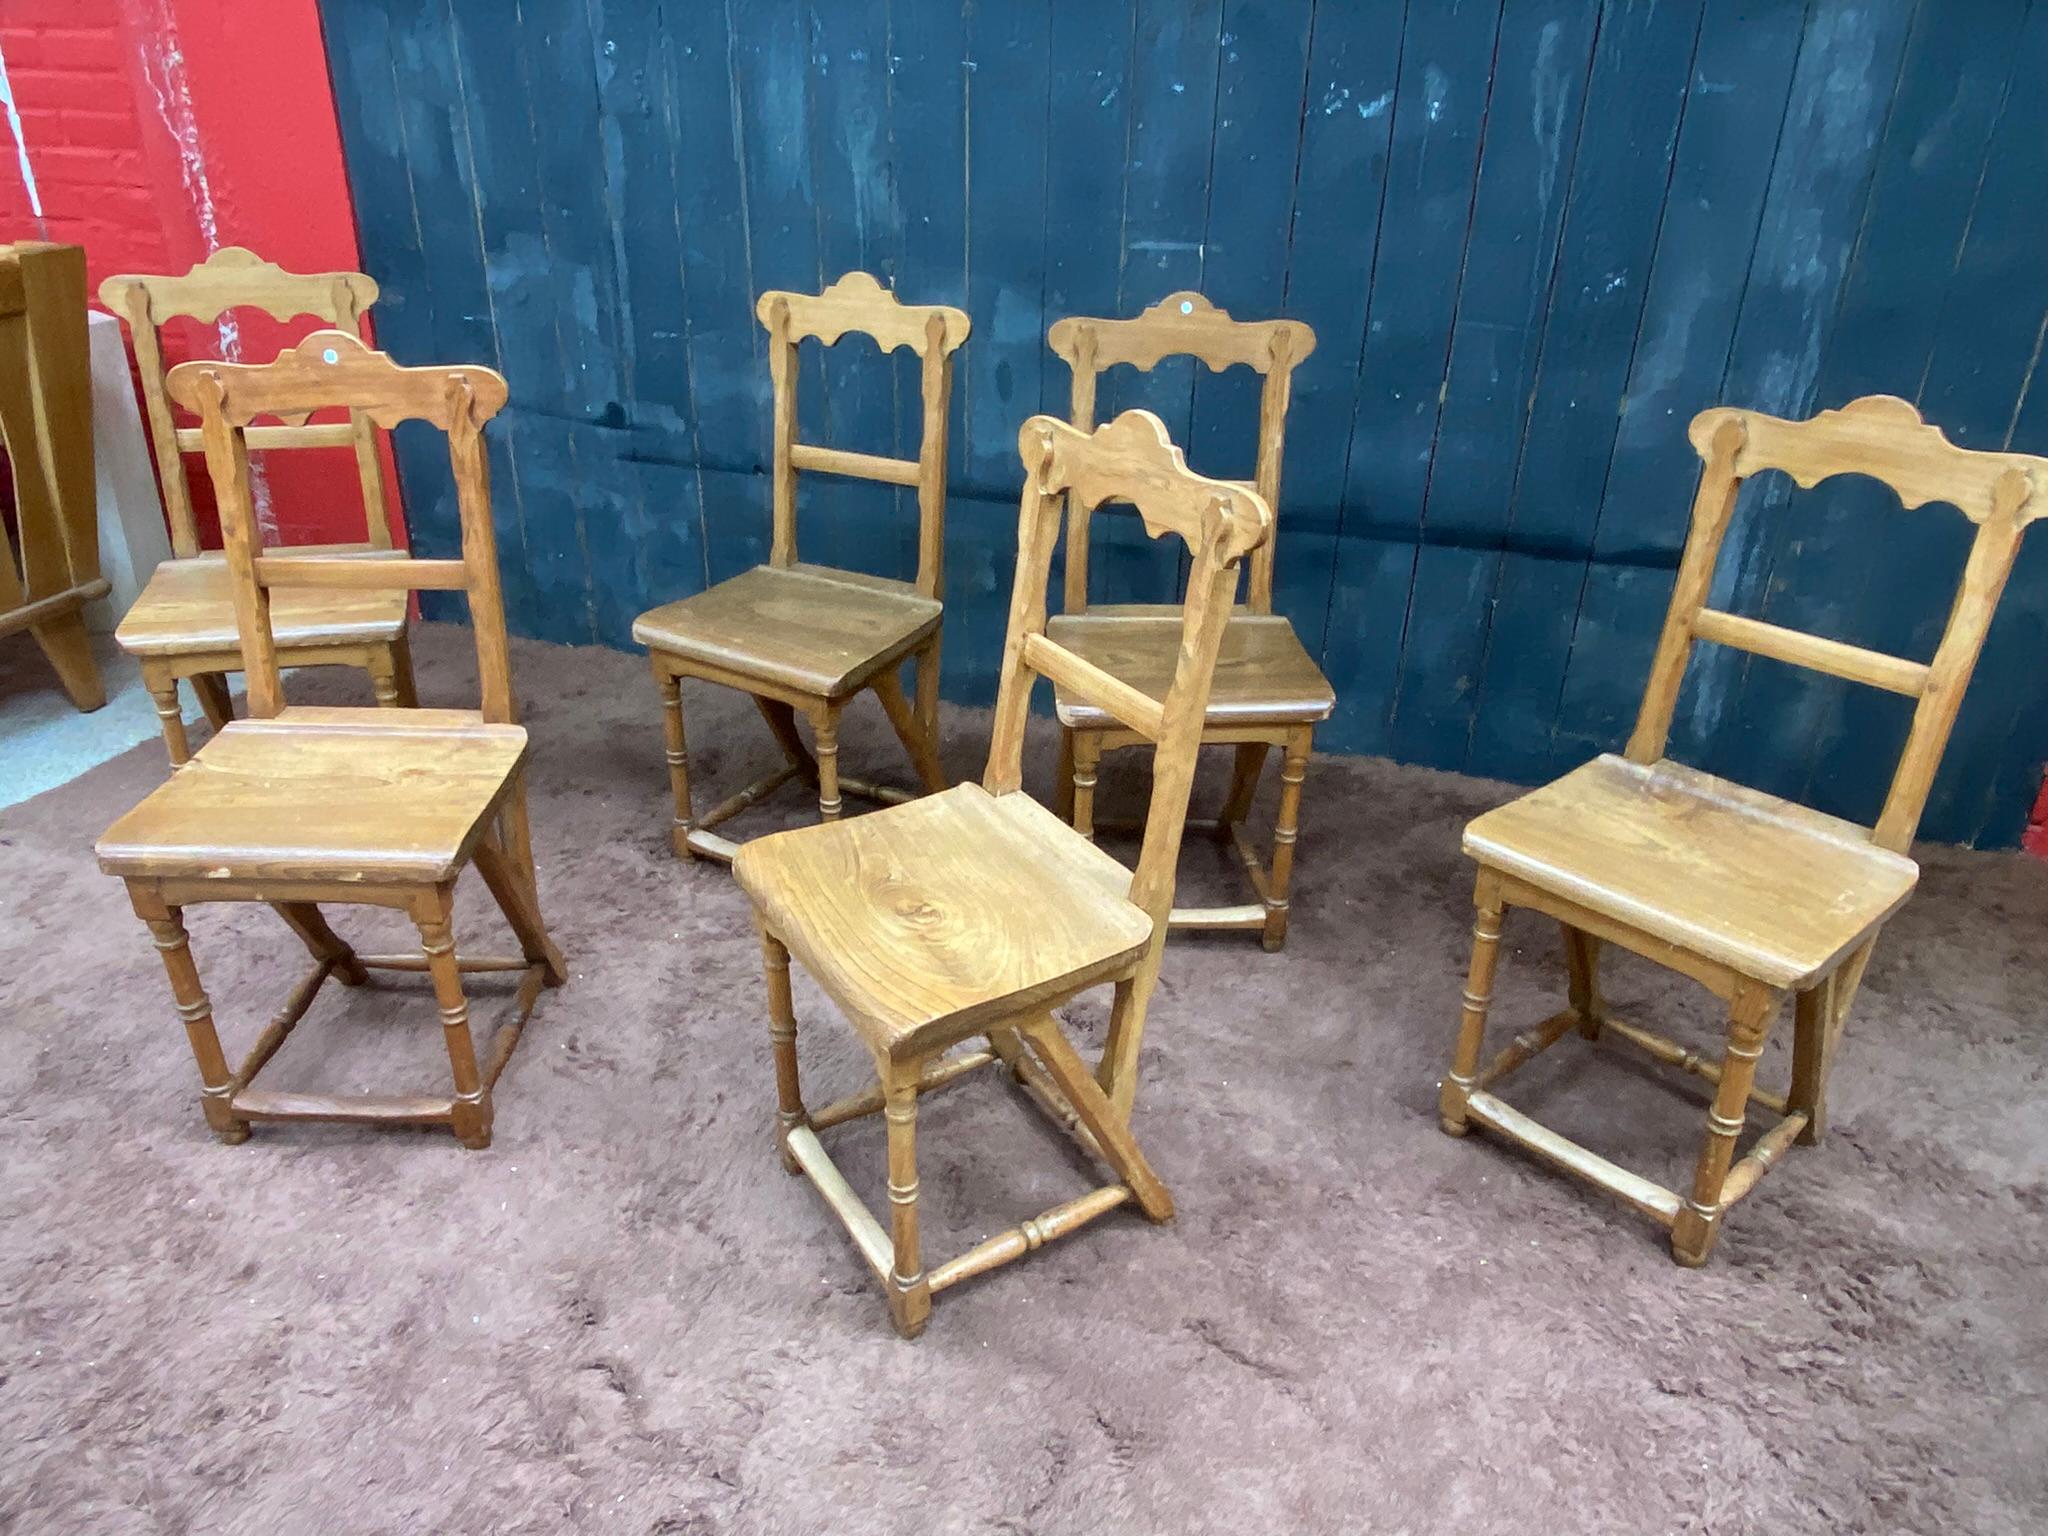 Brutalist 6 Mountain Chairs, in ELM, circa 1900 For Sale